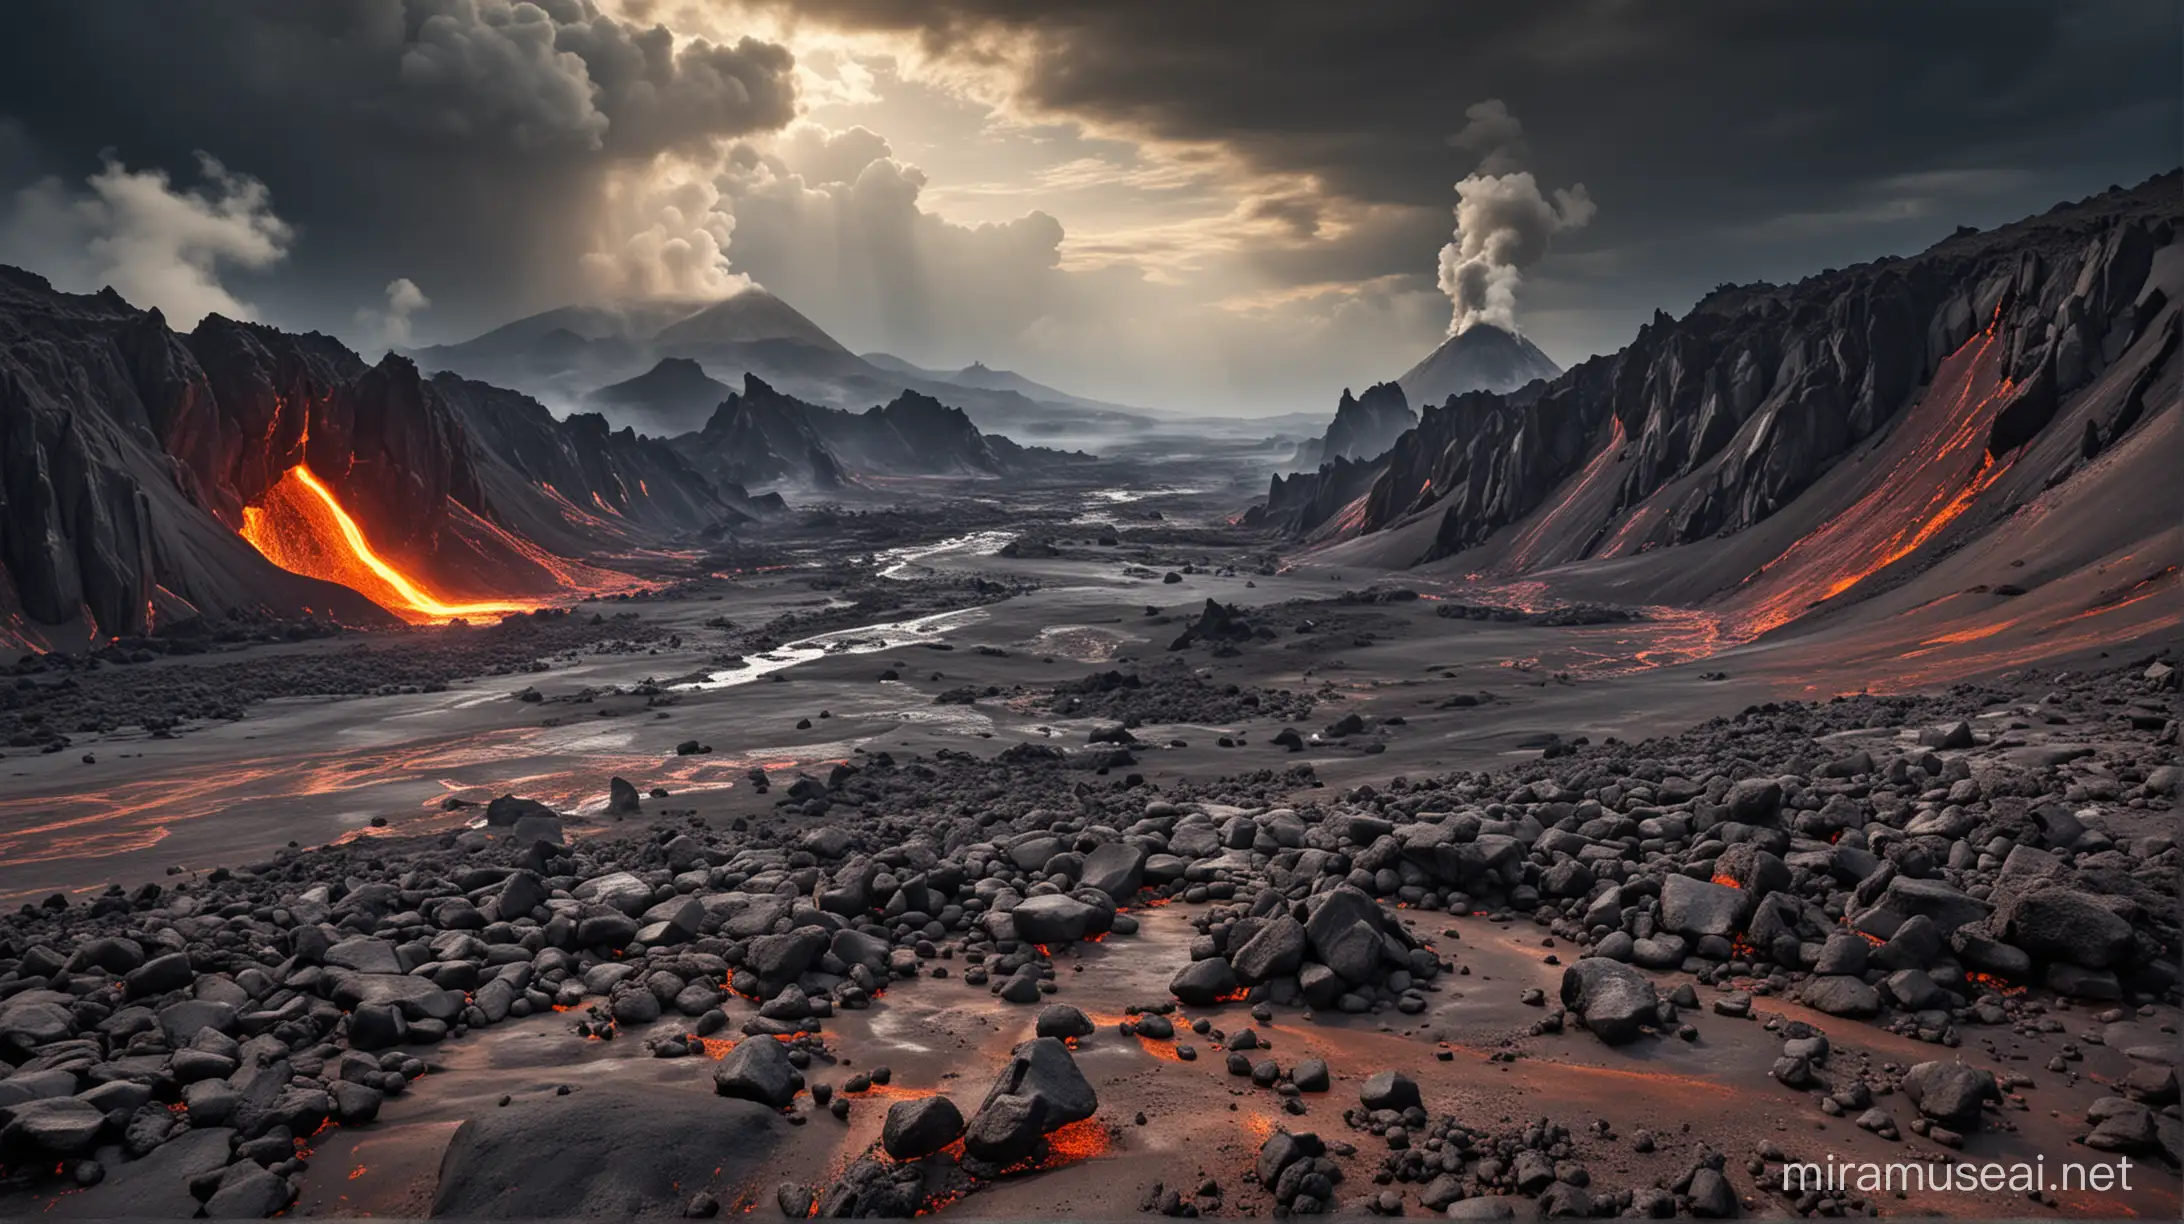 Dramatically Volcanic Landscape with Erupting Volcano and Lava Flow